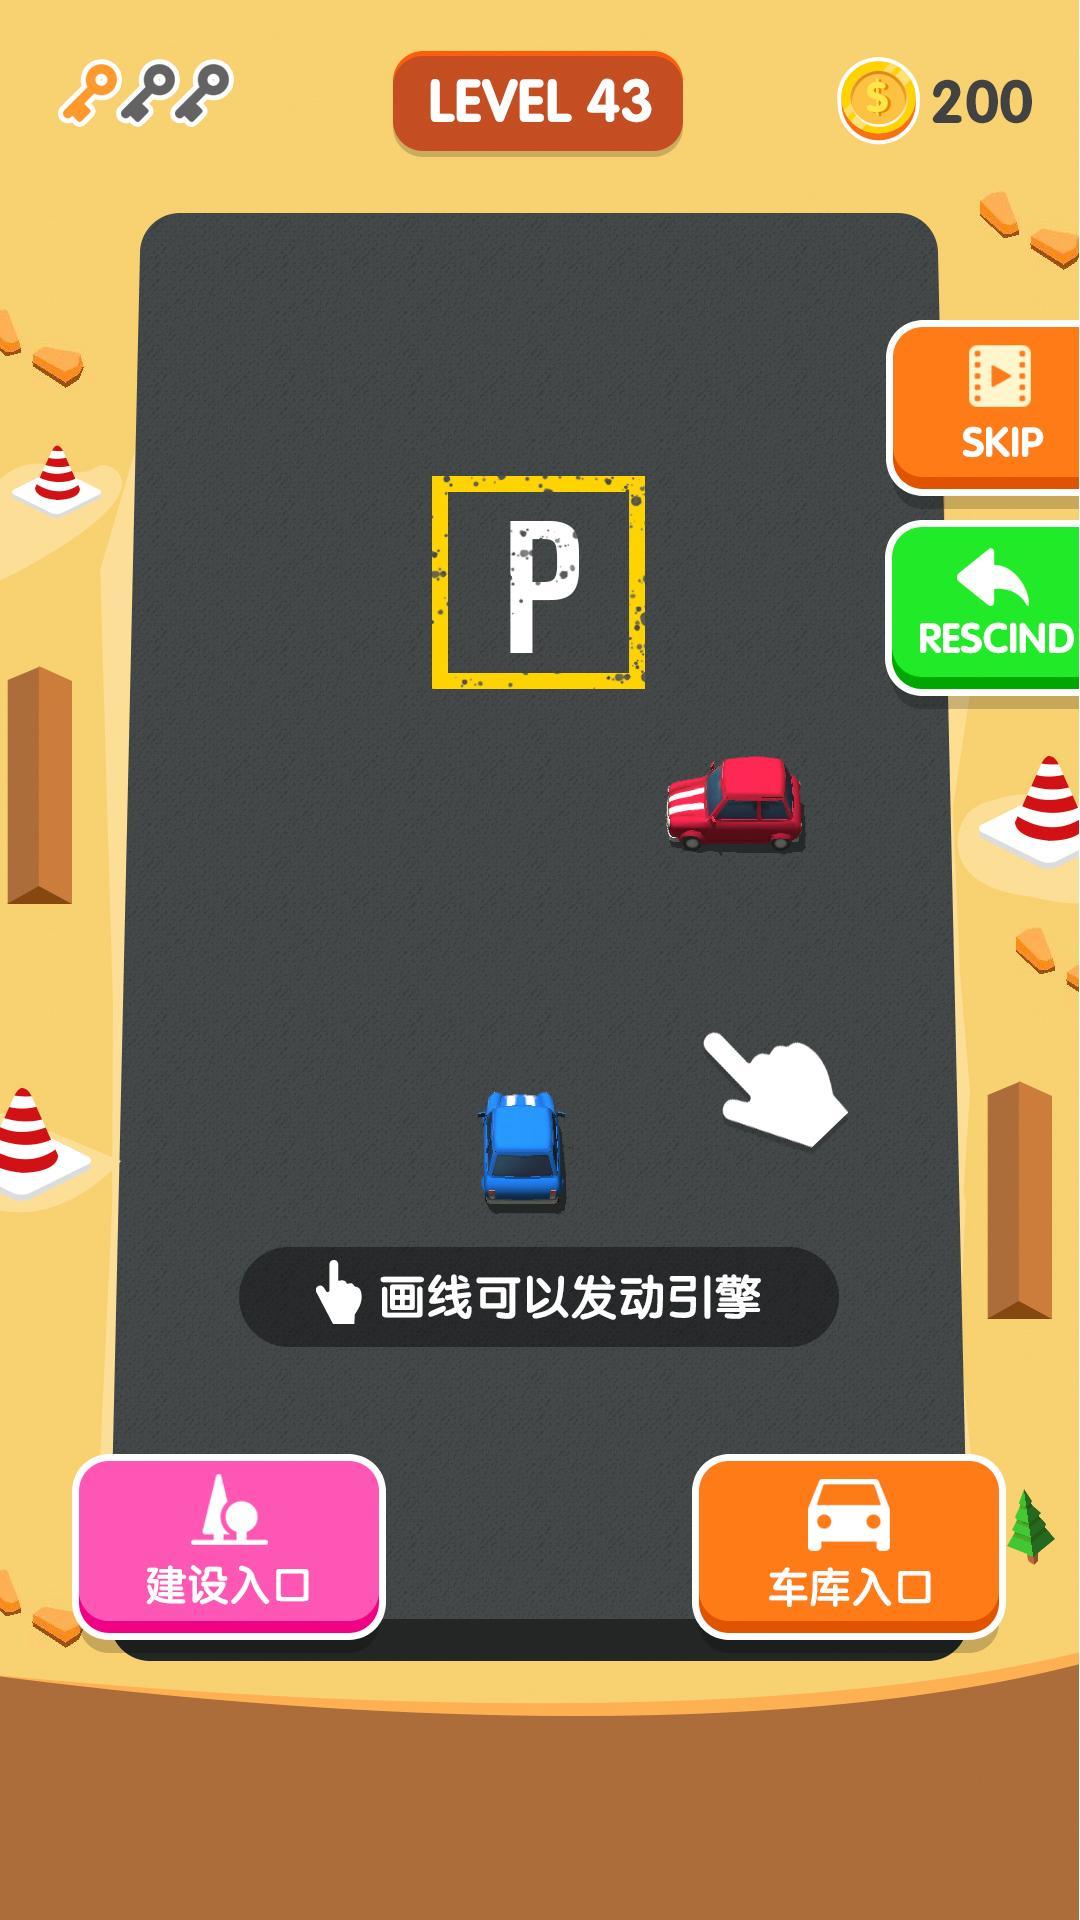 Screenshot 1 of Parco perfetto! 1.2.6